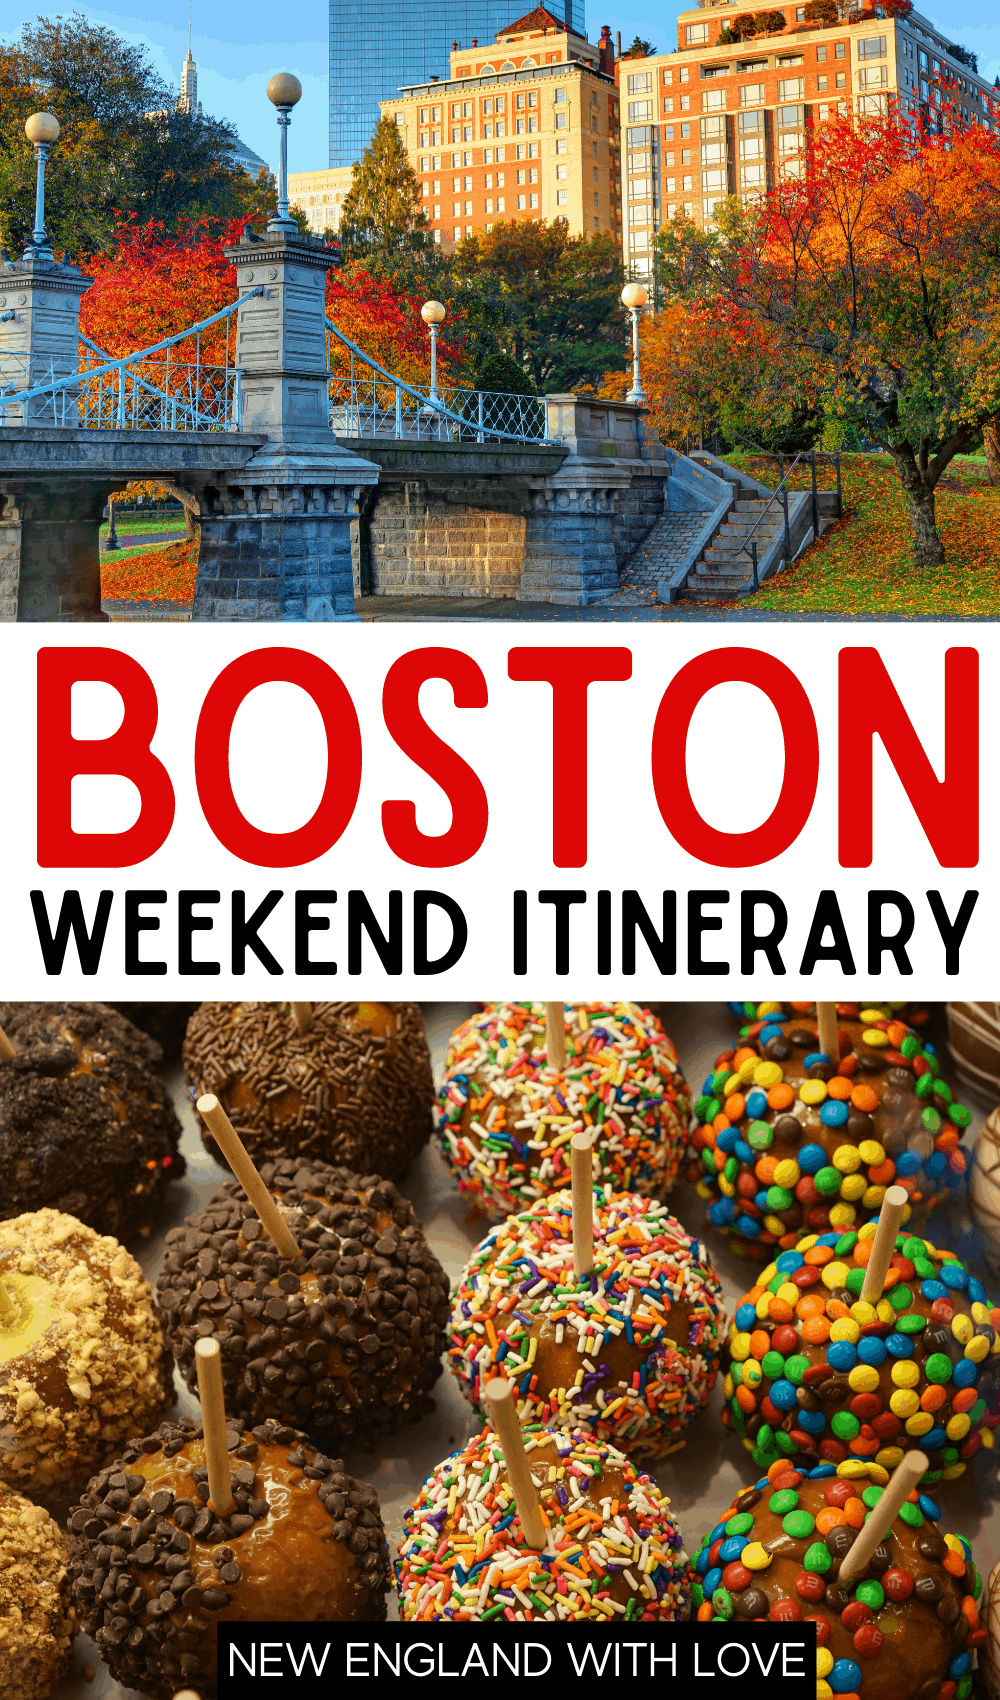 Pinterest graphic reading "BOSTON WEEKEND ITINERARY